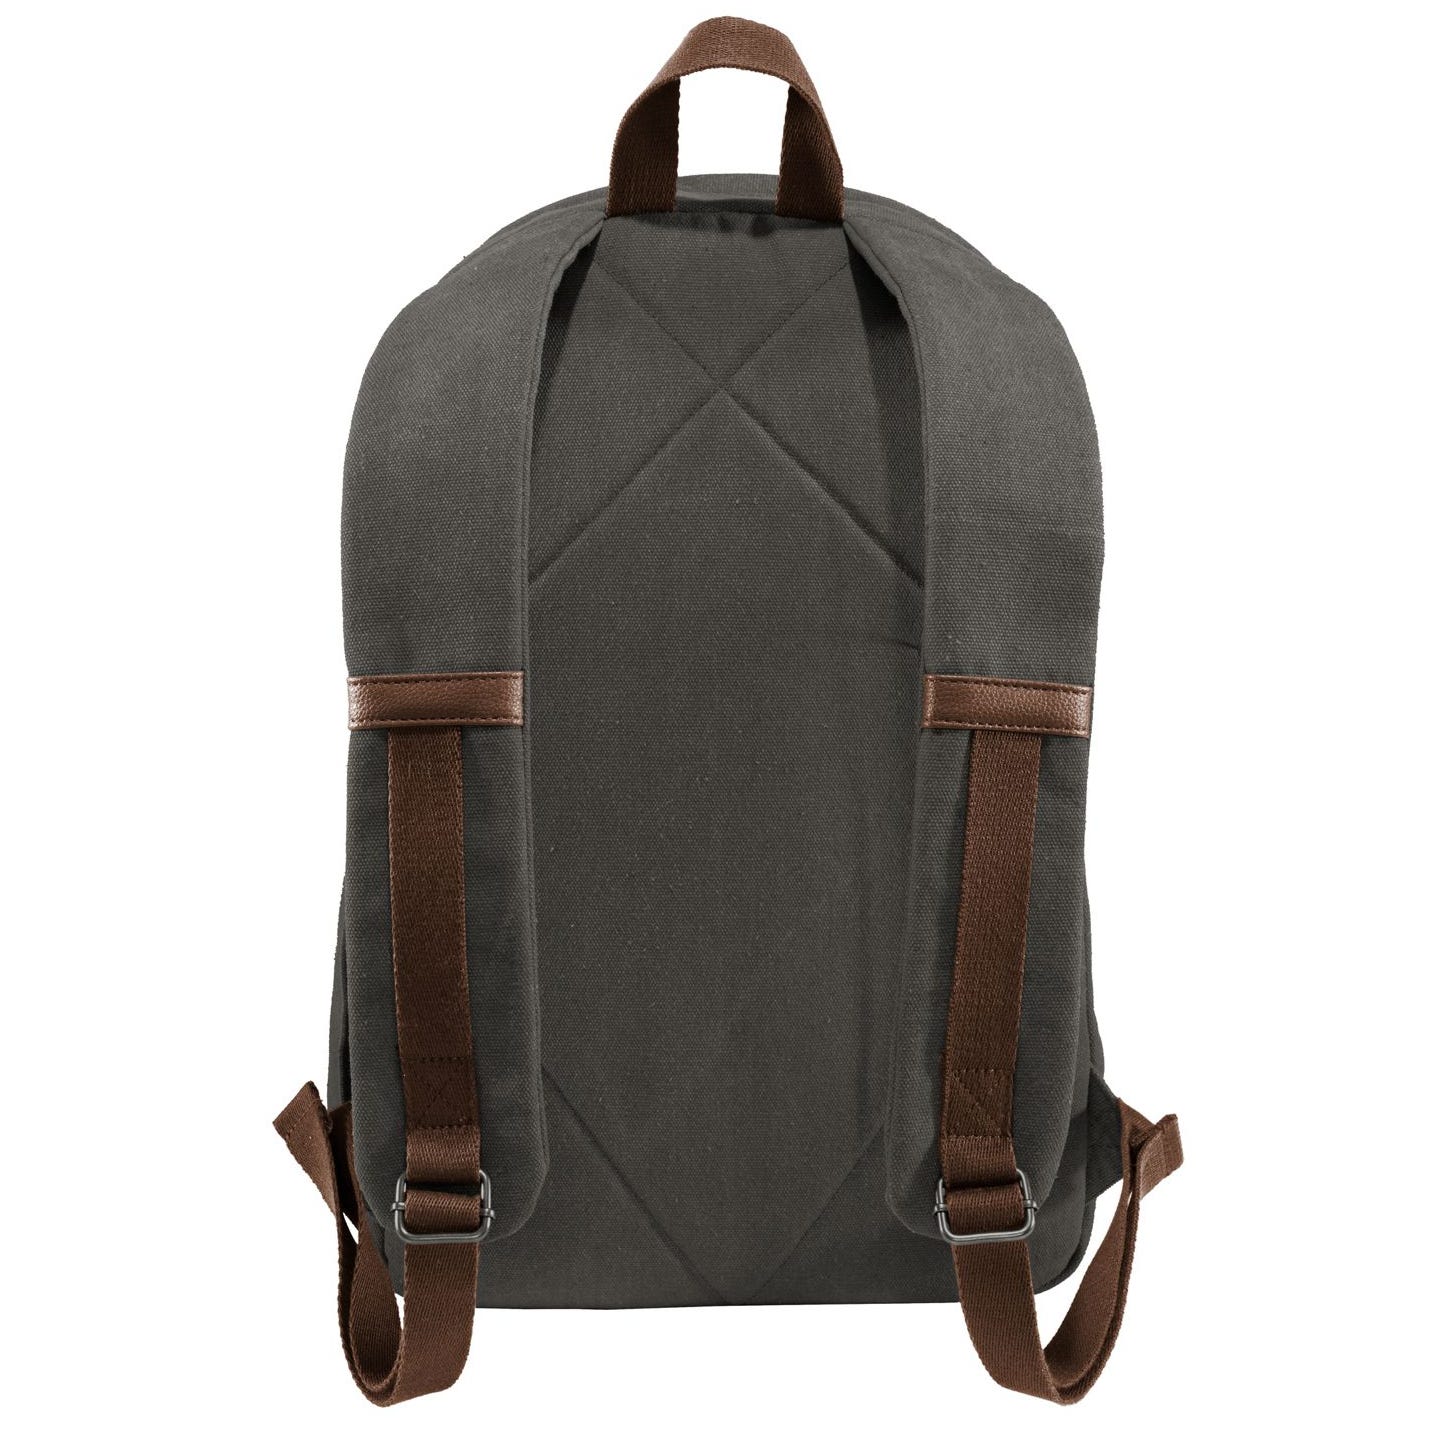 Unmask Our Kids Cotton Canvas Backpack